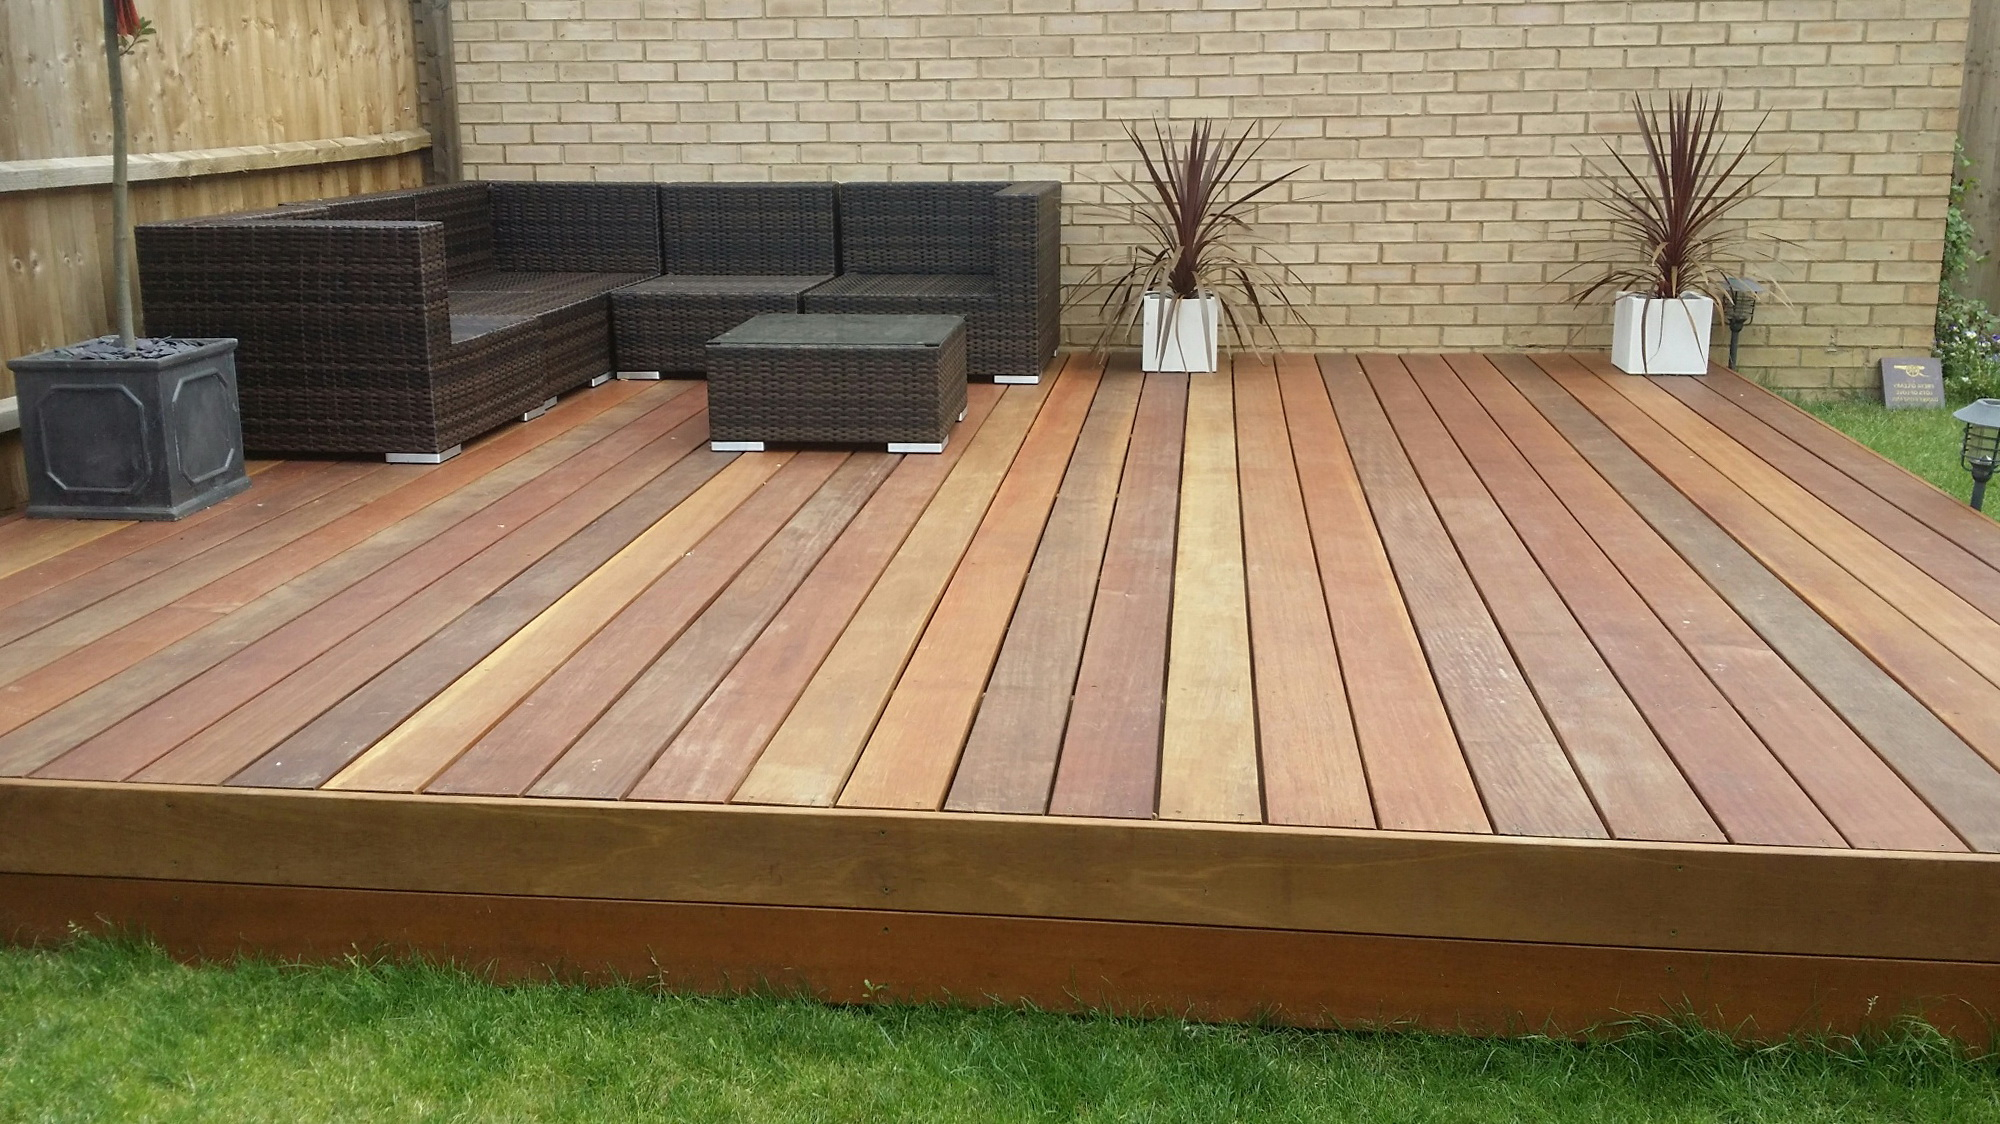 Non Wood Decking Alternatives Home Design Ideas with size 2000 X 1124